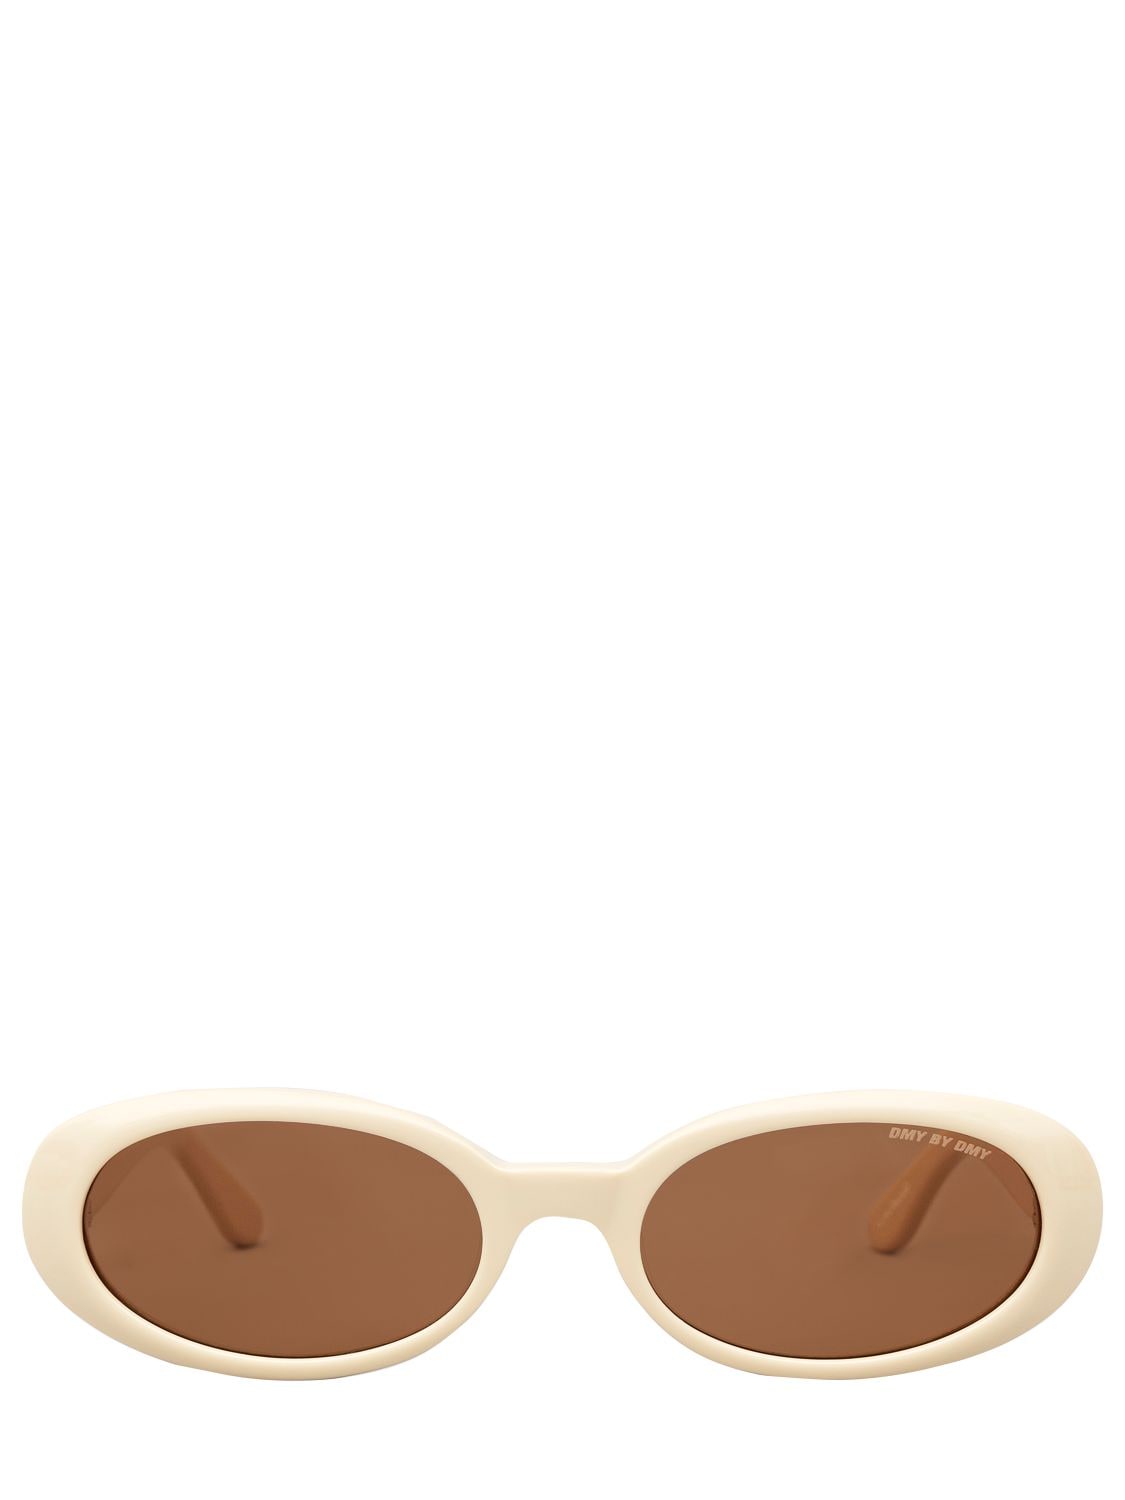 Dmy By Dmy Valentina Oval Acetate Sunglasses In Ivory,brown